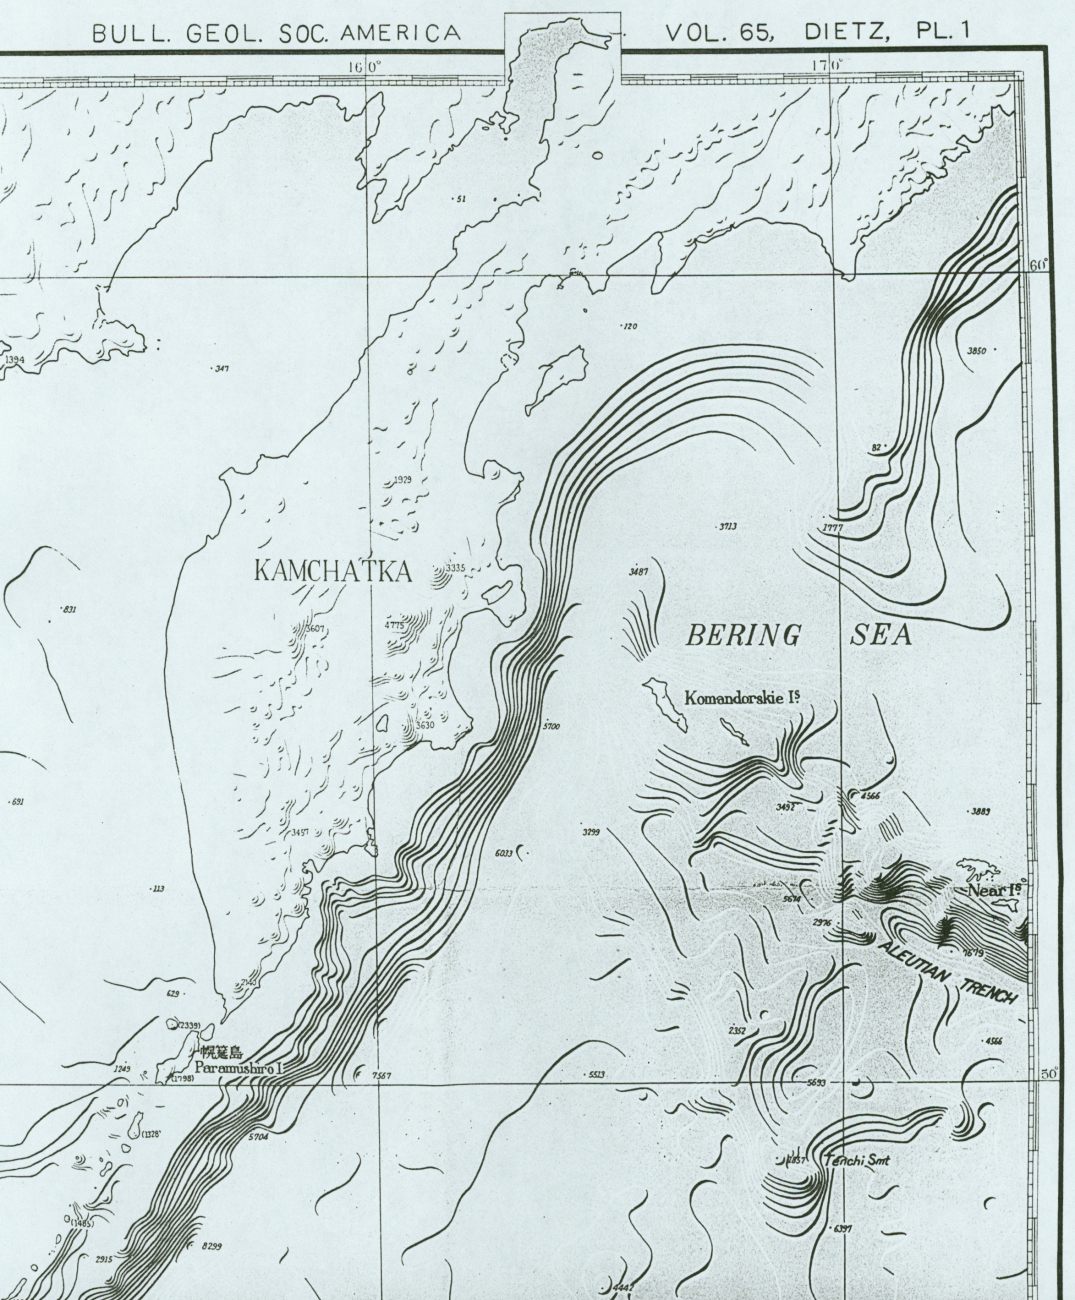 Section of Bathymetric Chart of the Northwest Pacific showingKuril Trench and Aleutian Trench